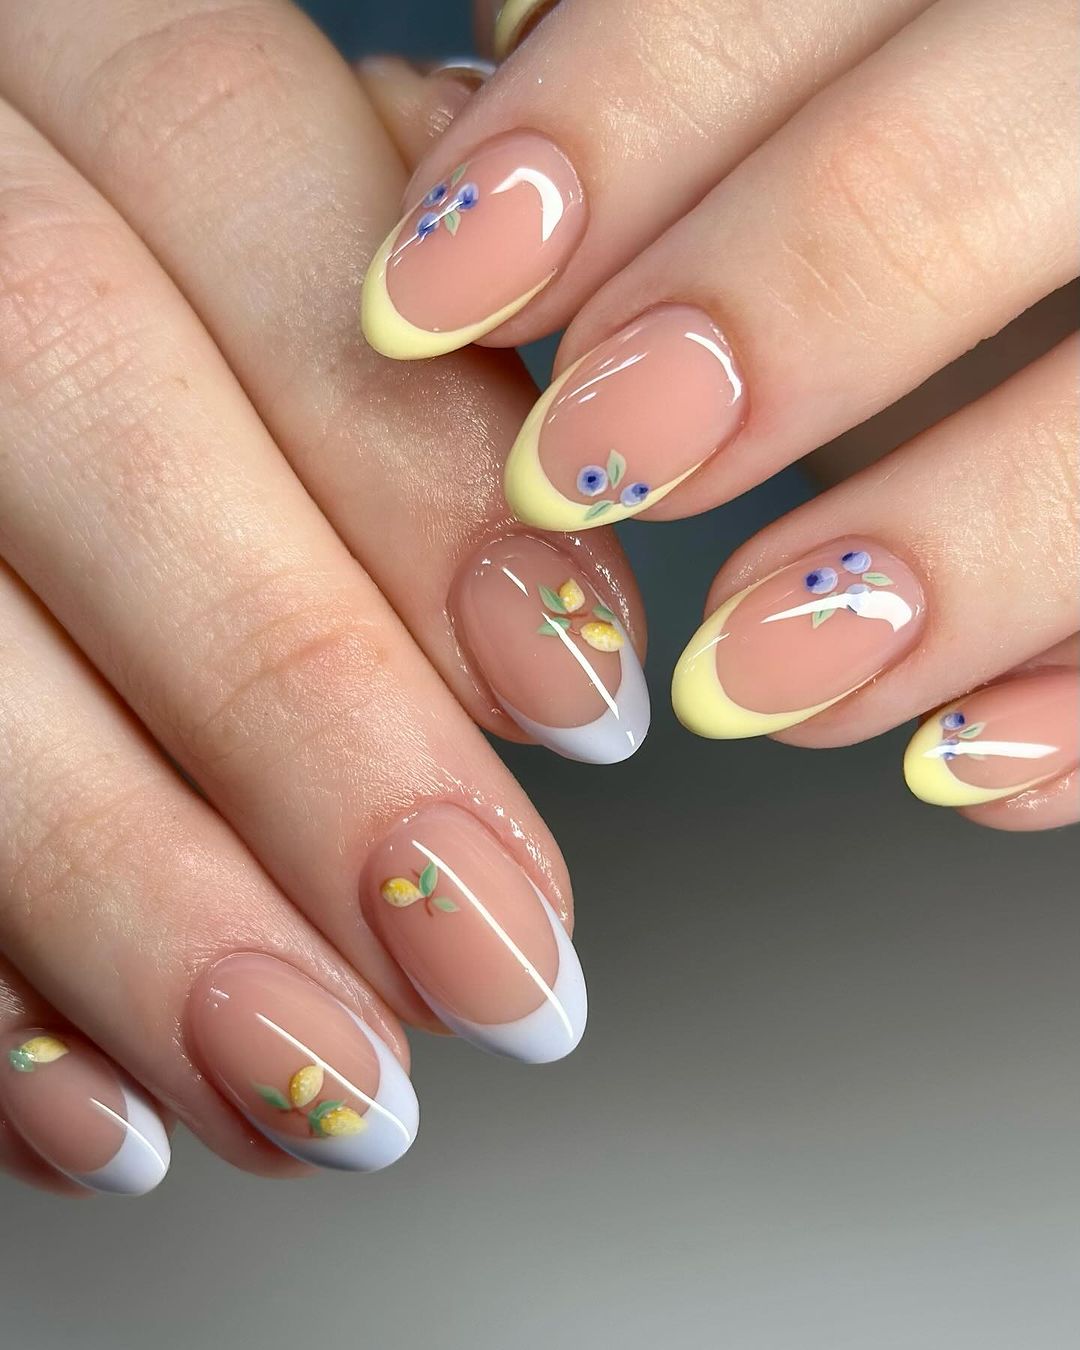 Yellow And Baby Blue French Many On Oval Nails With Delicate Fruit Designs